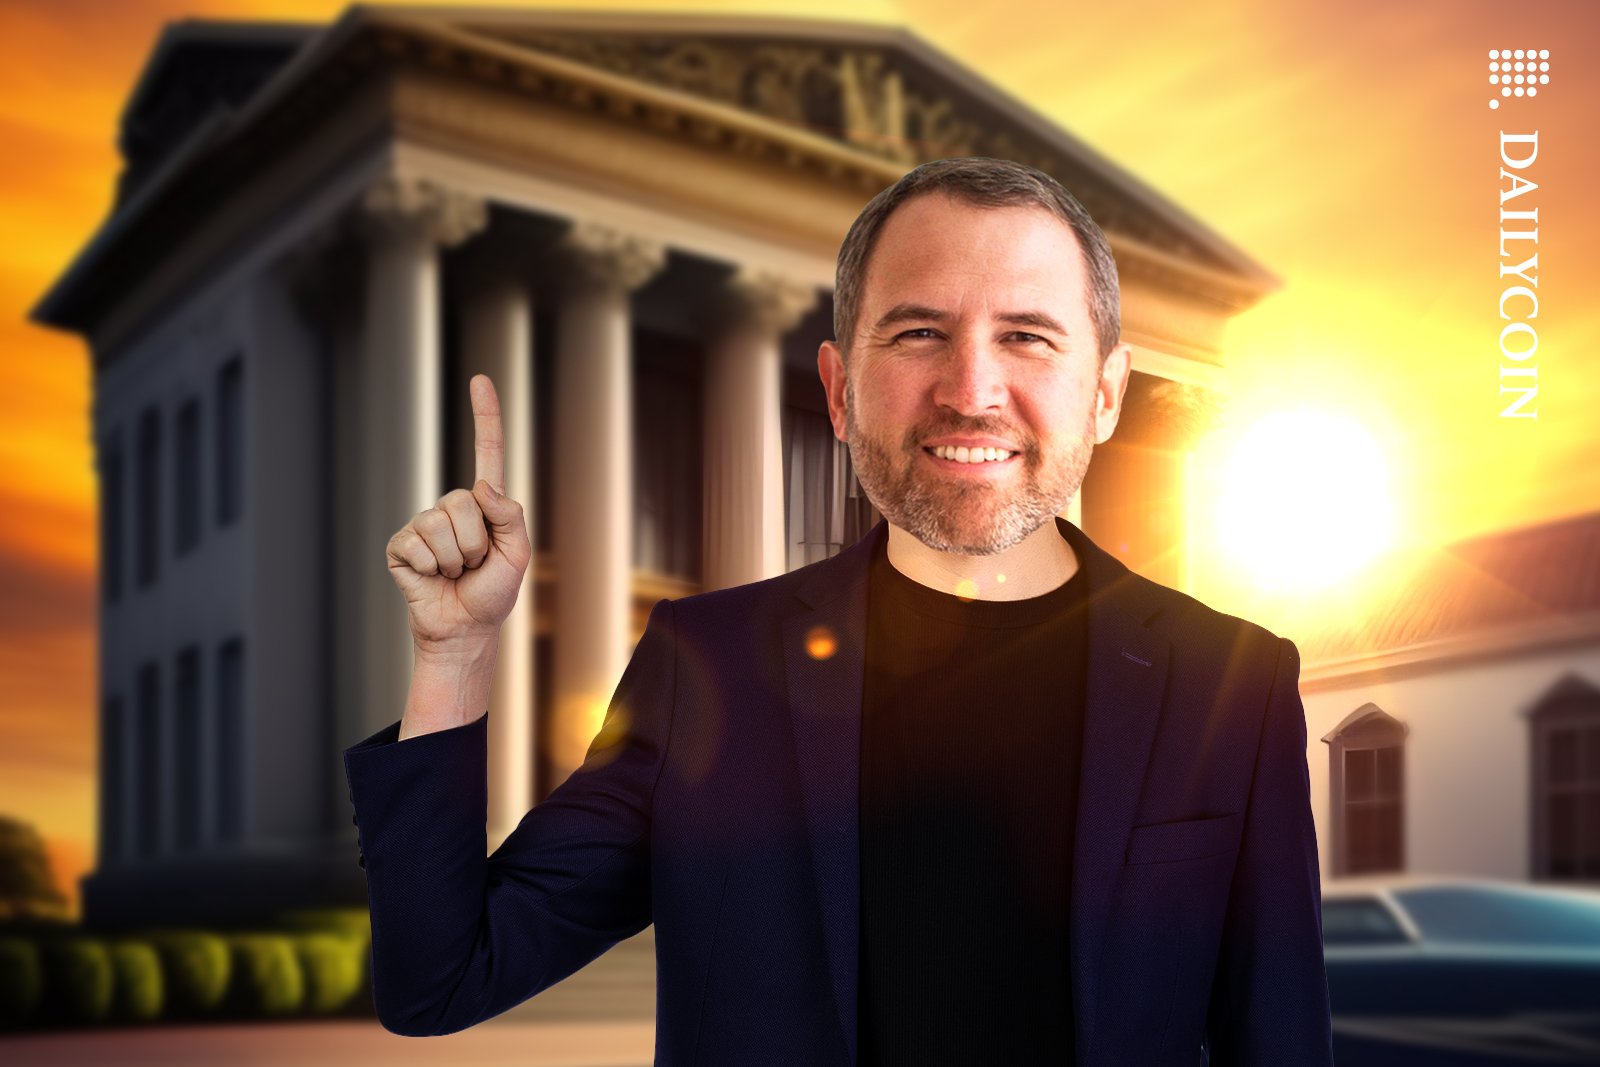 CEO of Ripple and XRP, Brad Garlinghouse setting the record straight about the lawsuit.